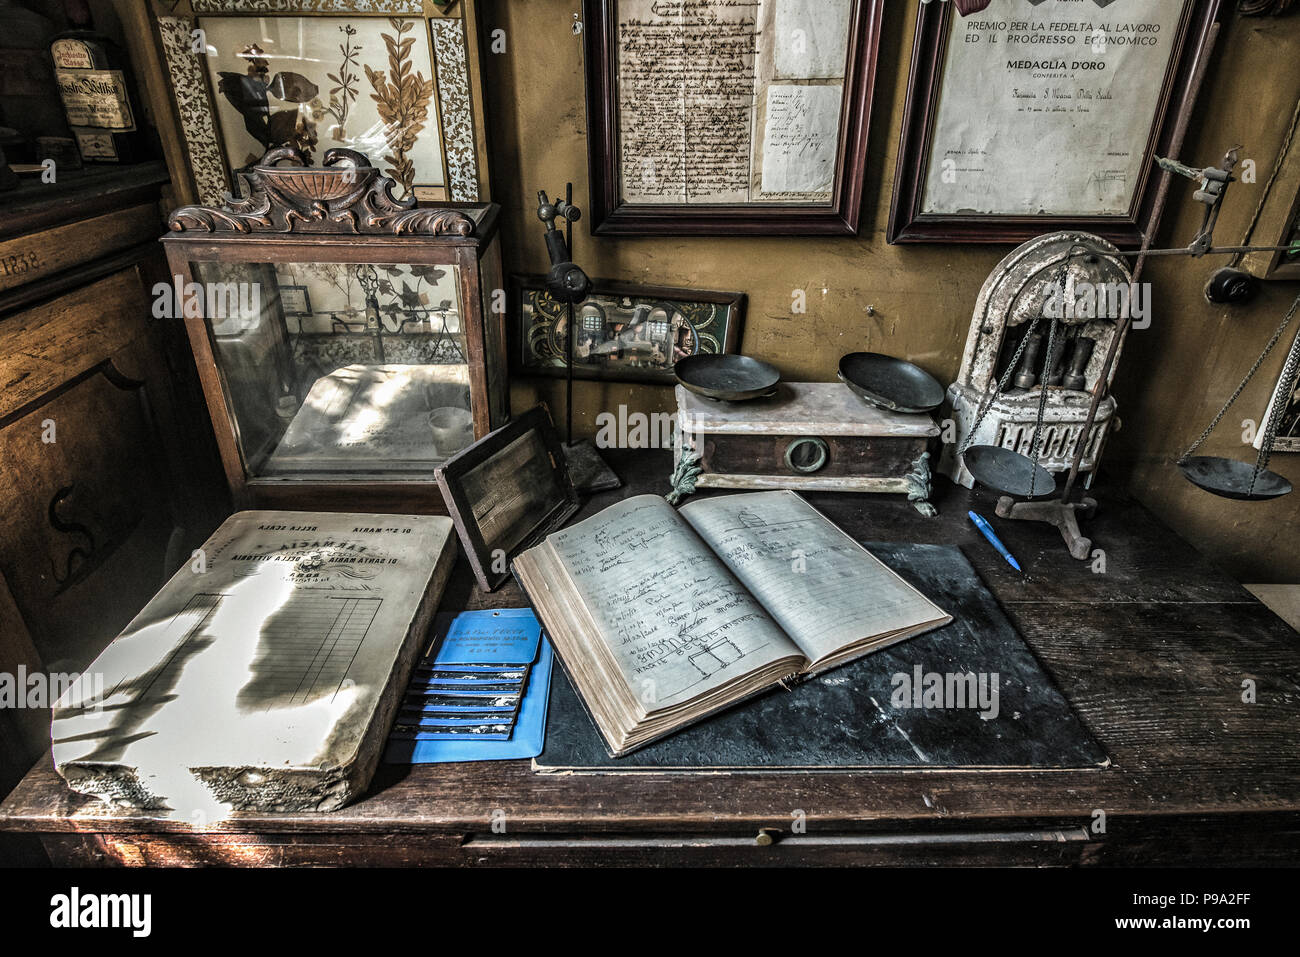 The work table of the pharmacist with weight scales and a copybook in the back room of the main hall of the old Pharmacy and Apothecary 'Farmacia di S. Maria della Scala' in Piazza della Scala in Trastevere quarter, Rome, Italy Stock Photo